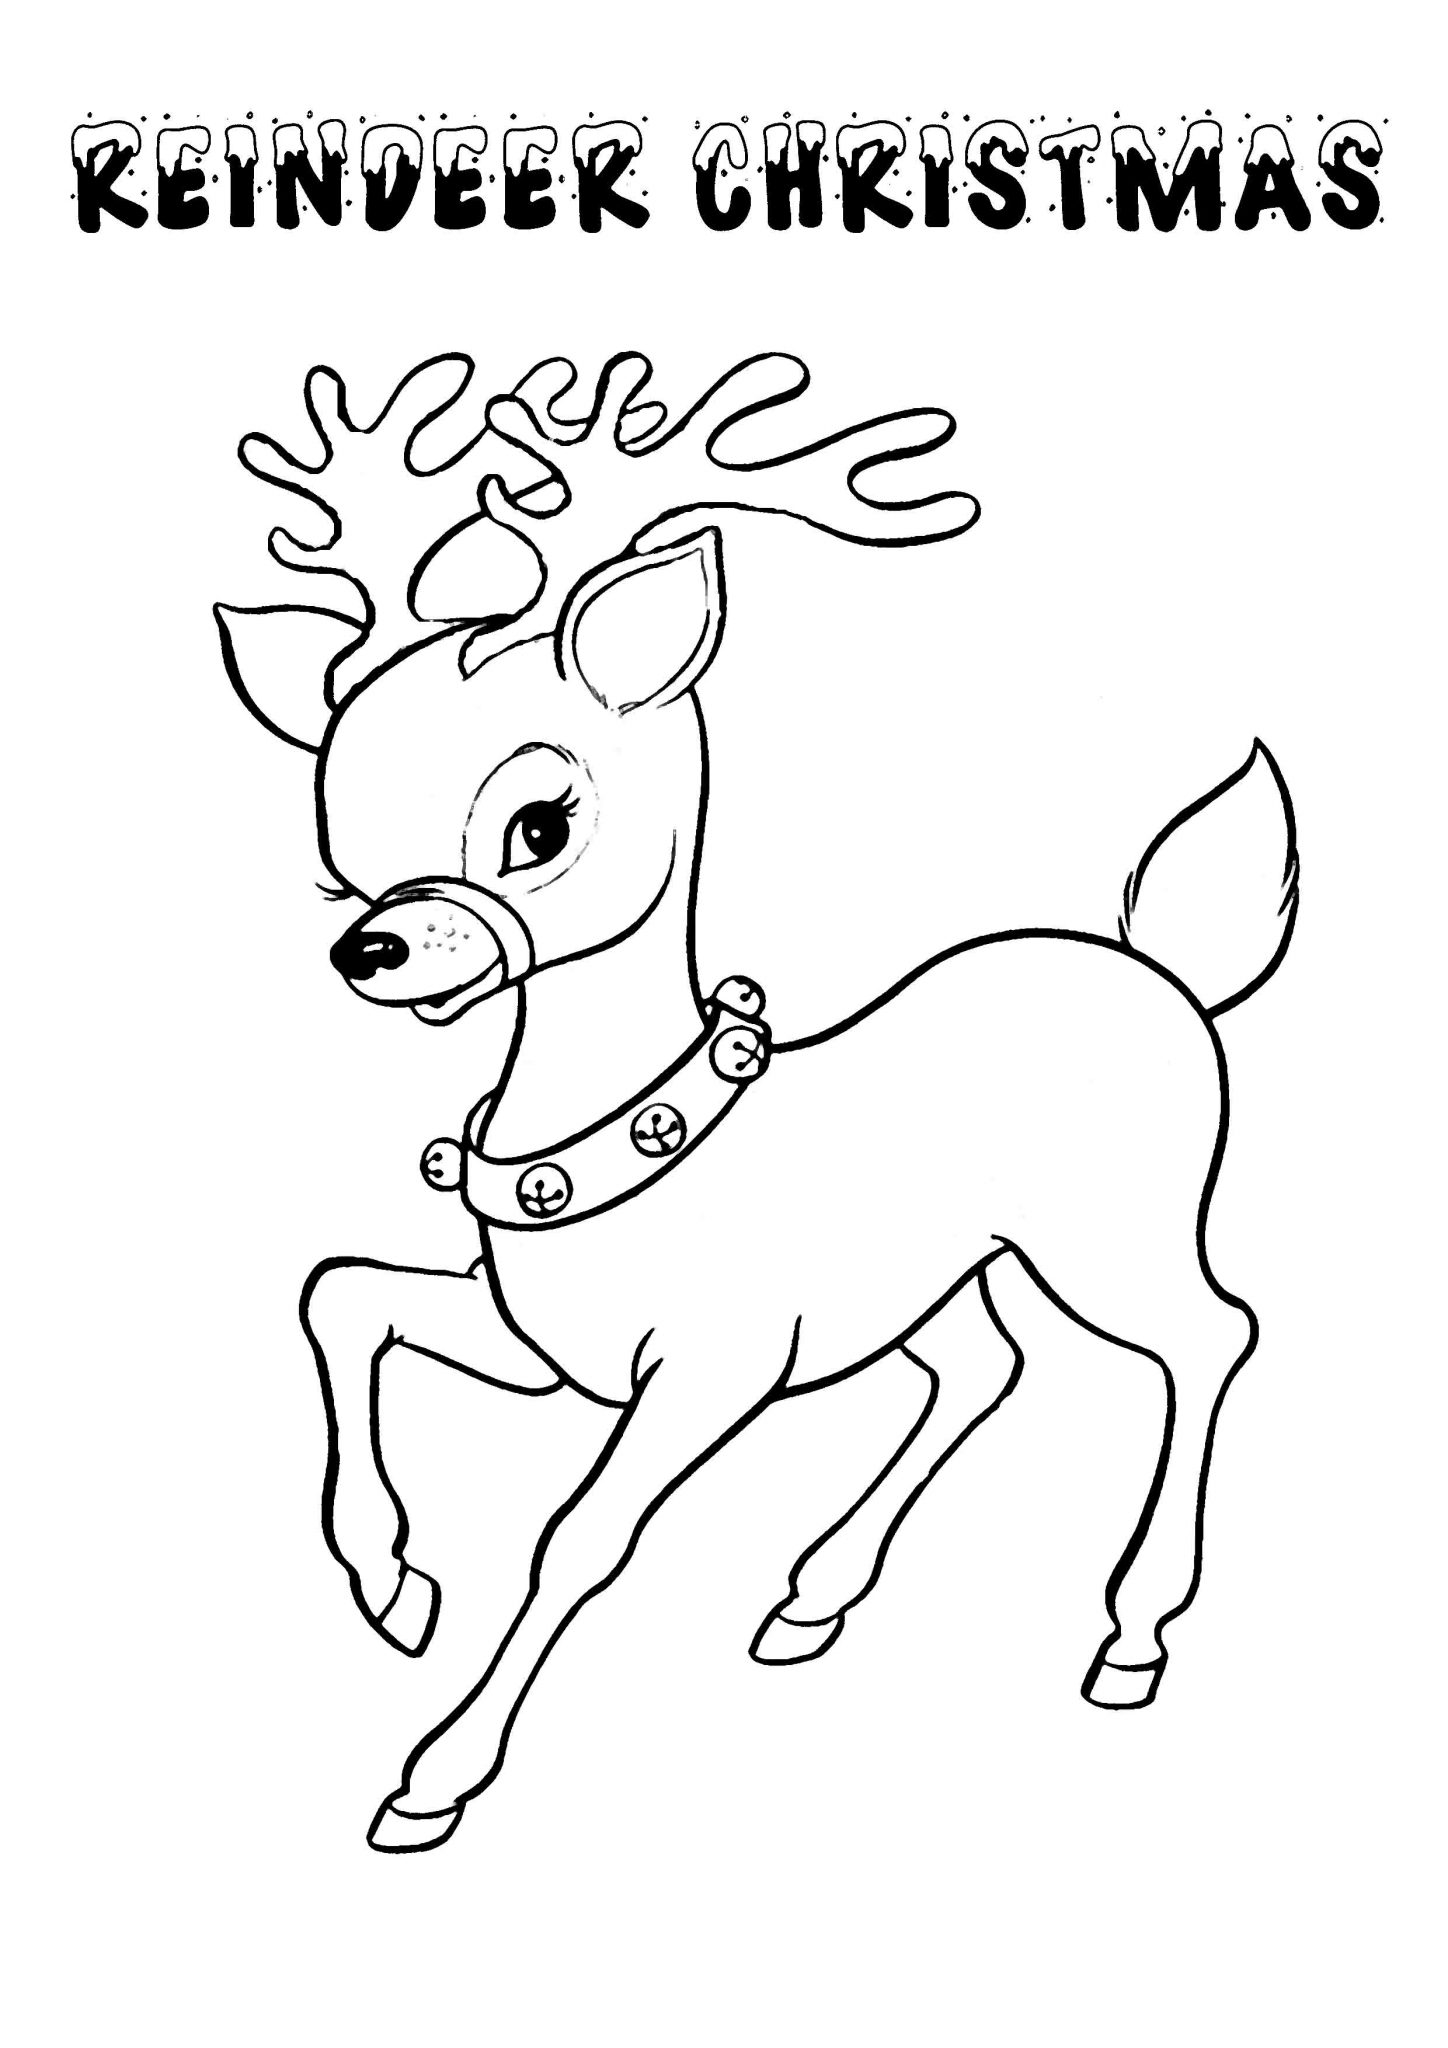 Download Printable Christmas Coloring Pages for Kids - Best Apps For Kids